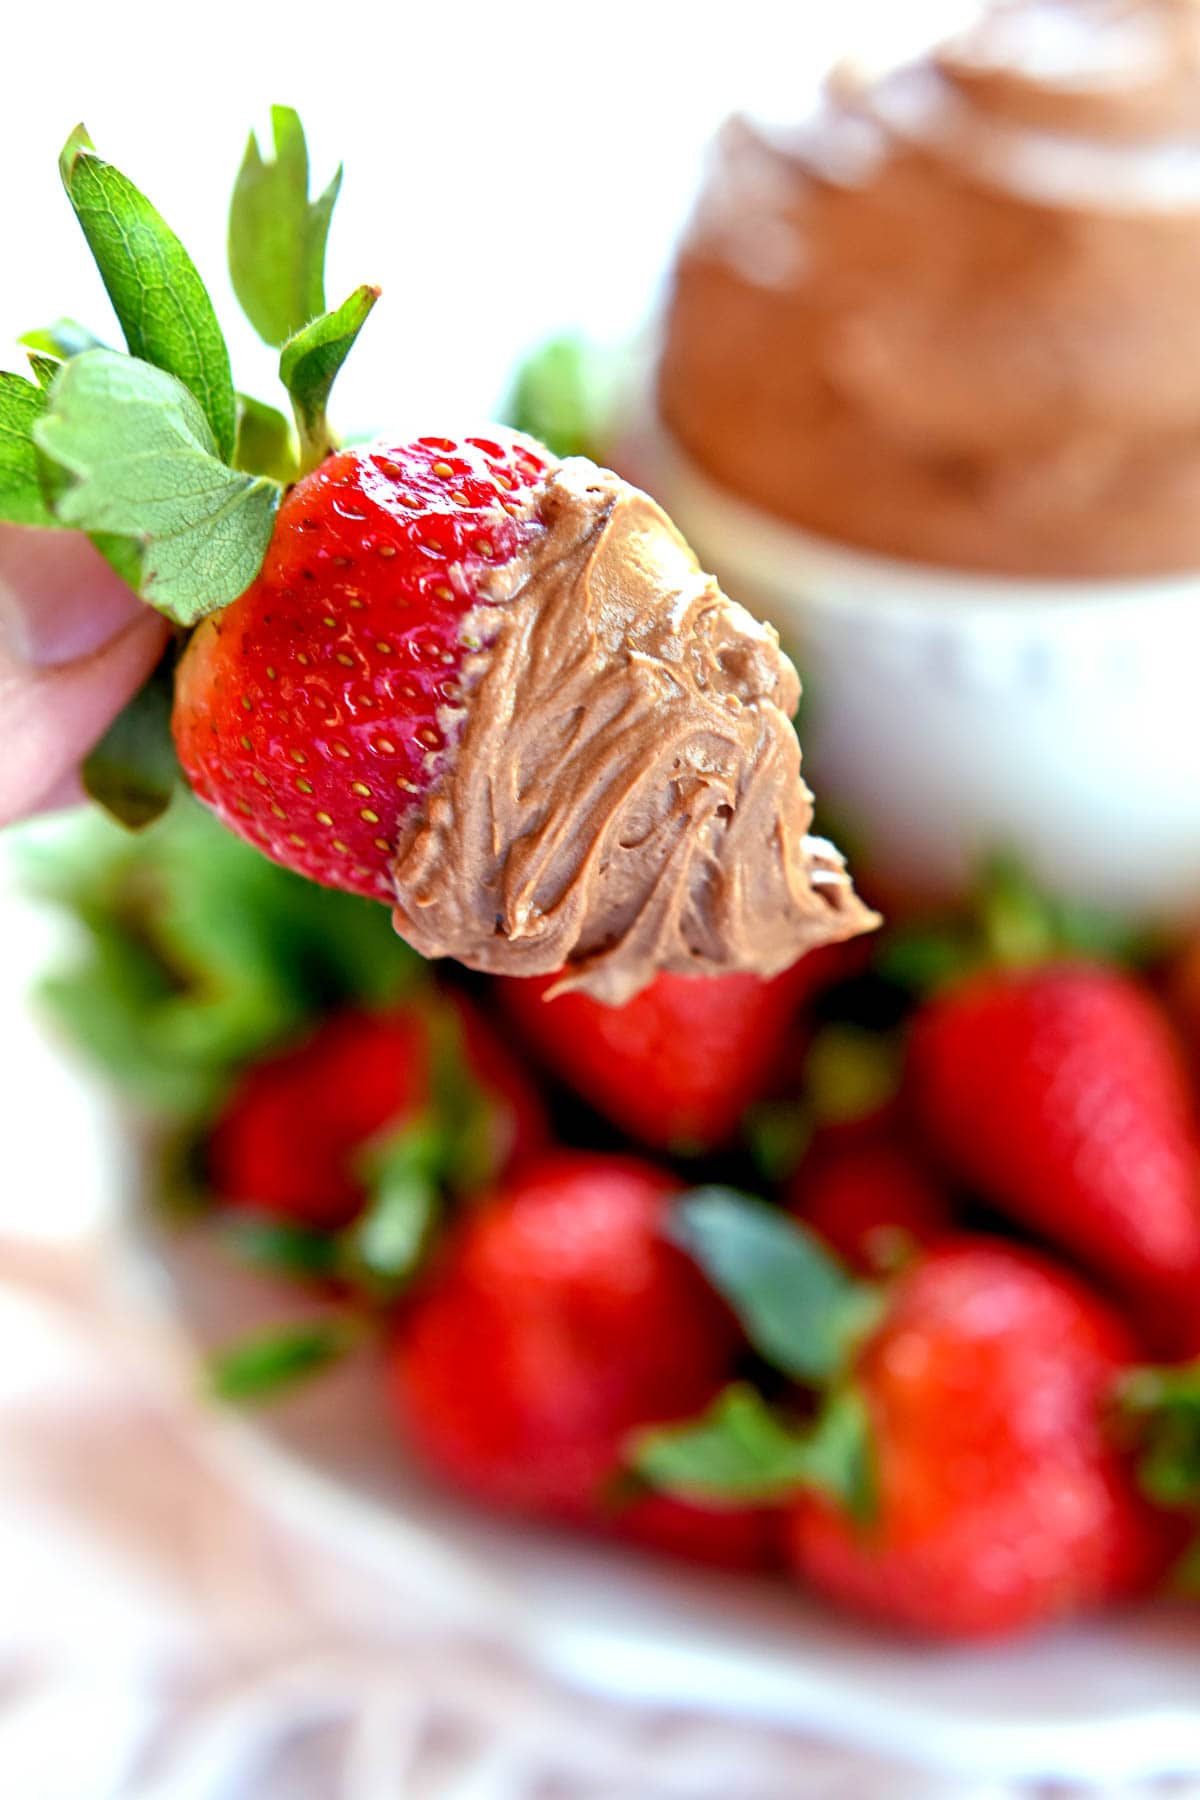 Chocolate Dip on strawberry with bowl and berries in background.